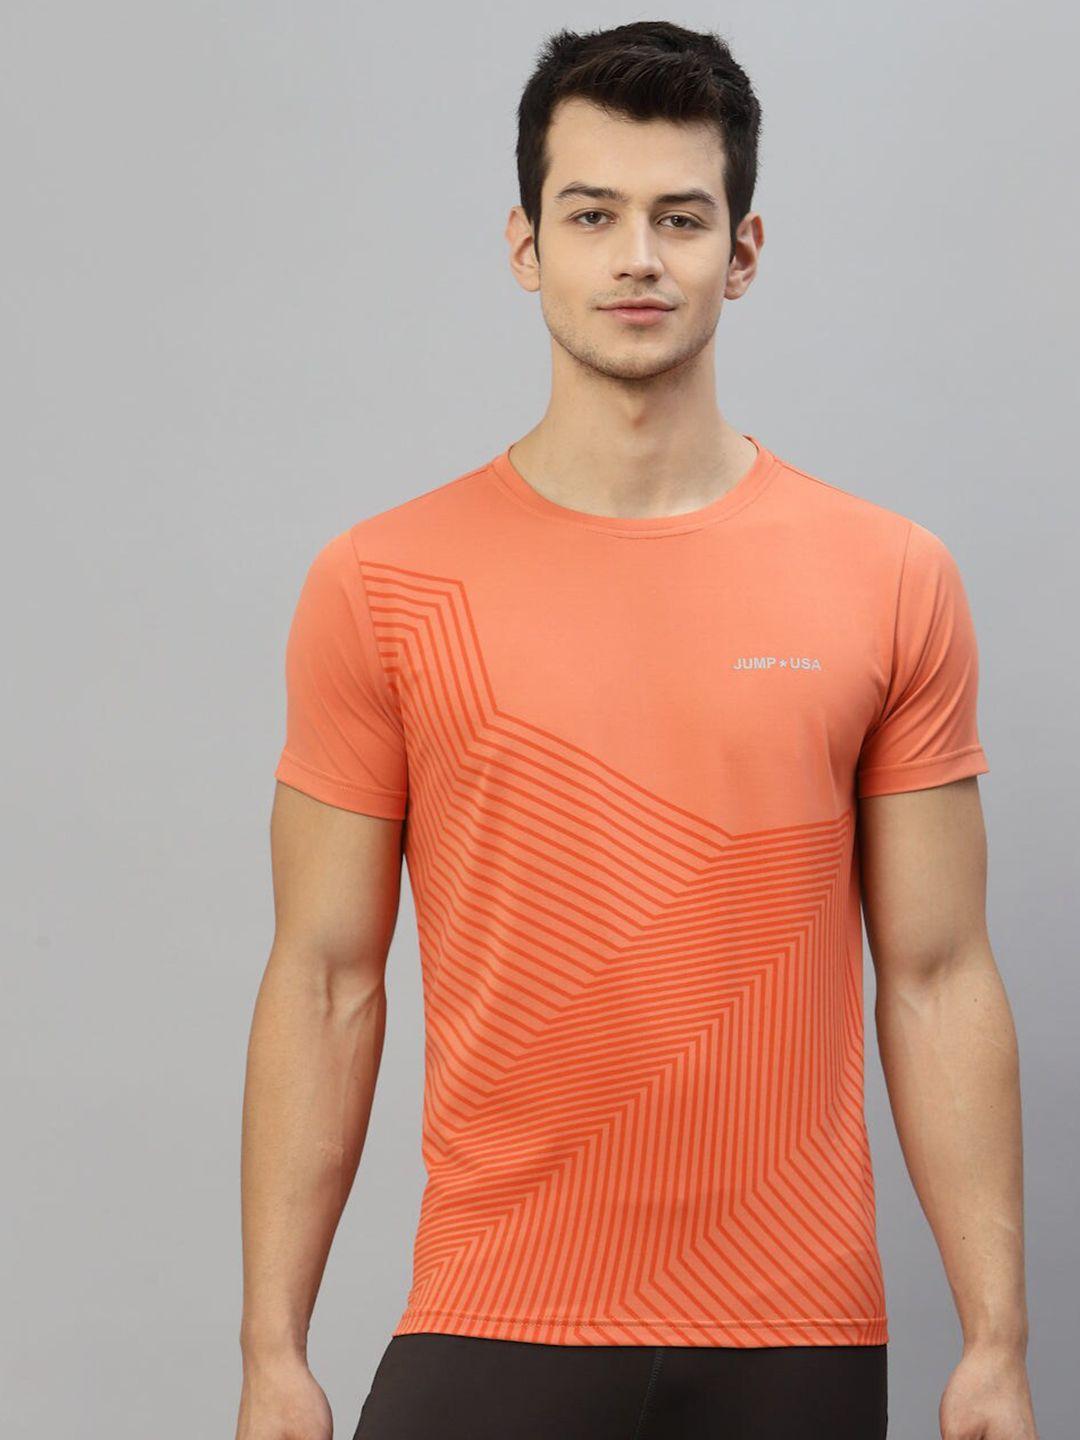 jump usa round neck rapid dry training or gym t-shirt